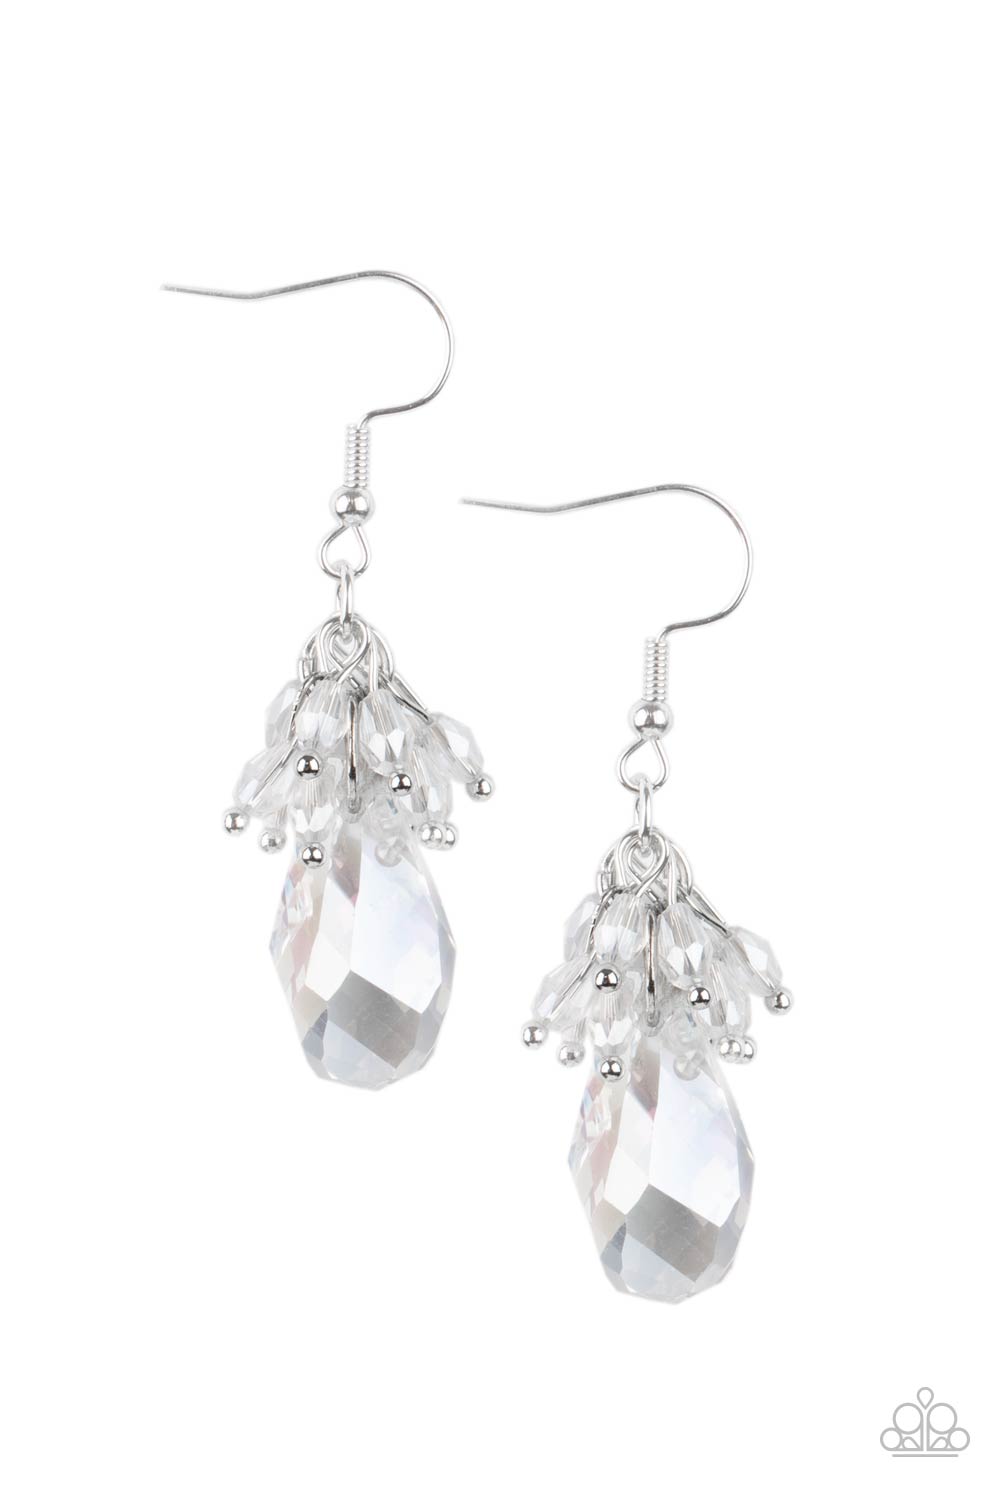 Well Versed in Sparkle - White Iridescent Beads Earrings - Paparazzi Accessories - GlaMarous Titi Jewels